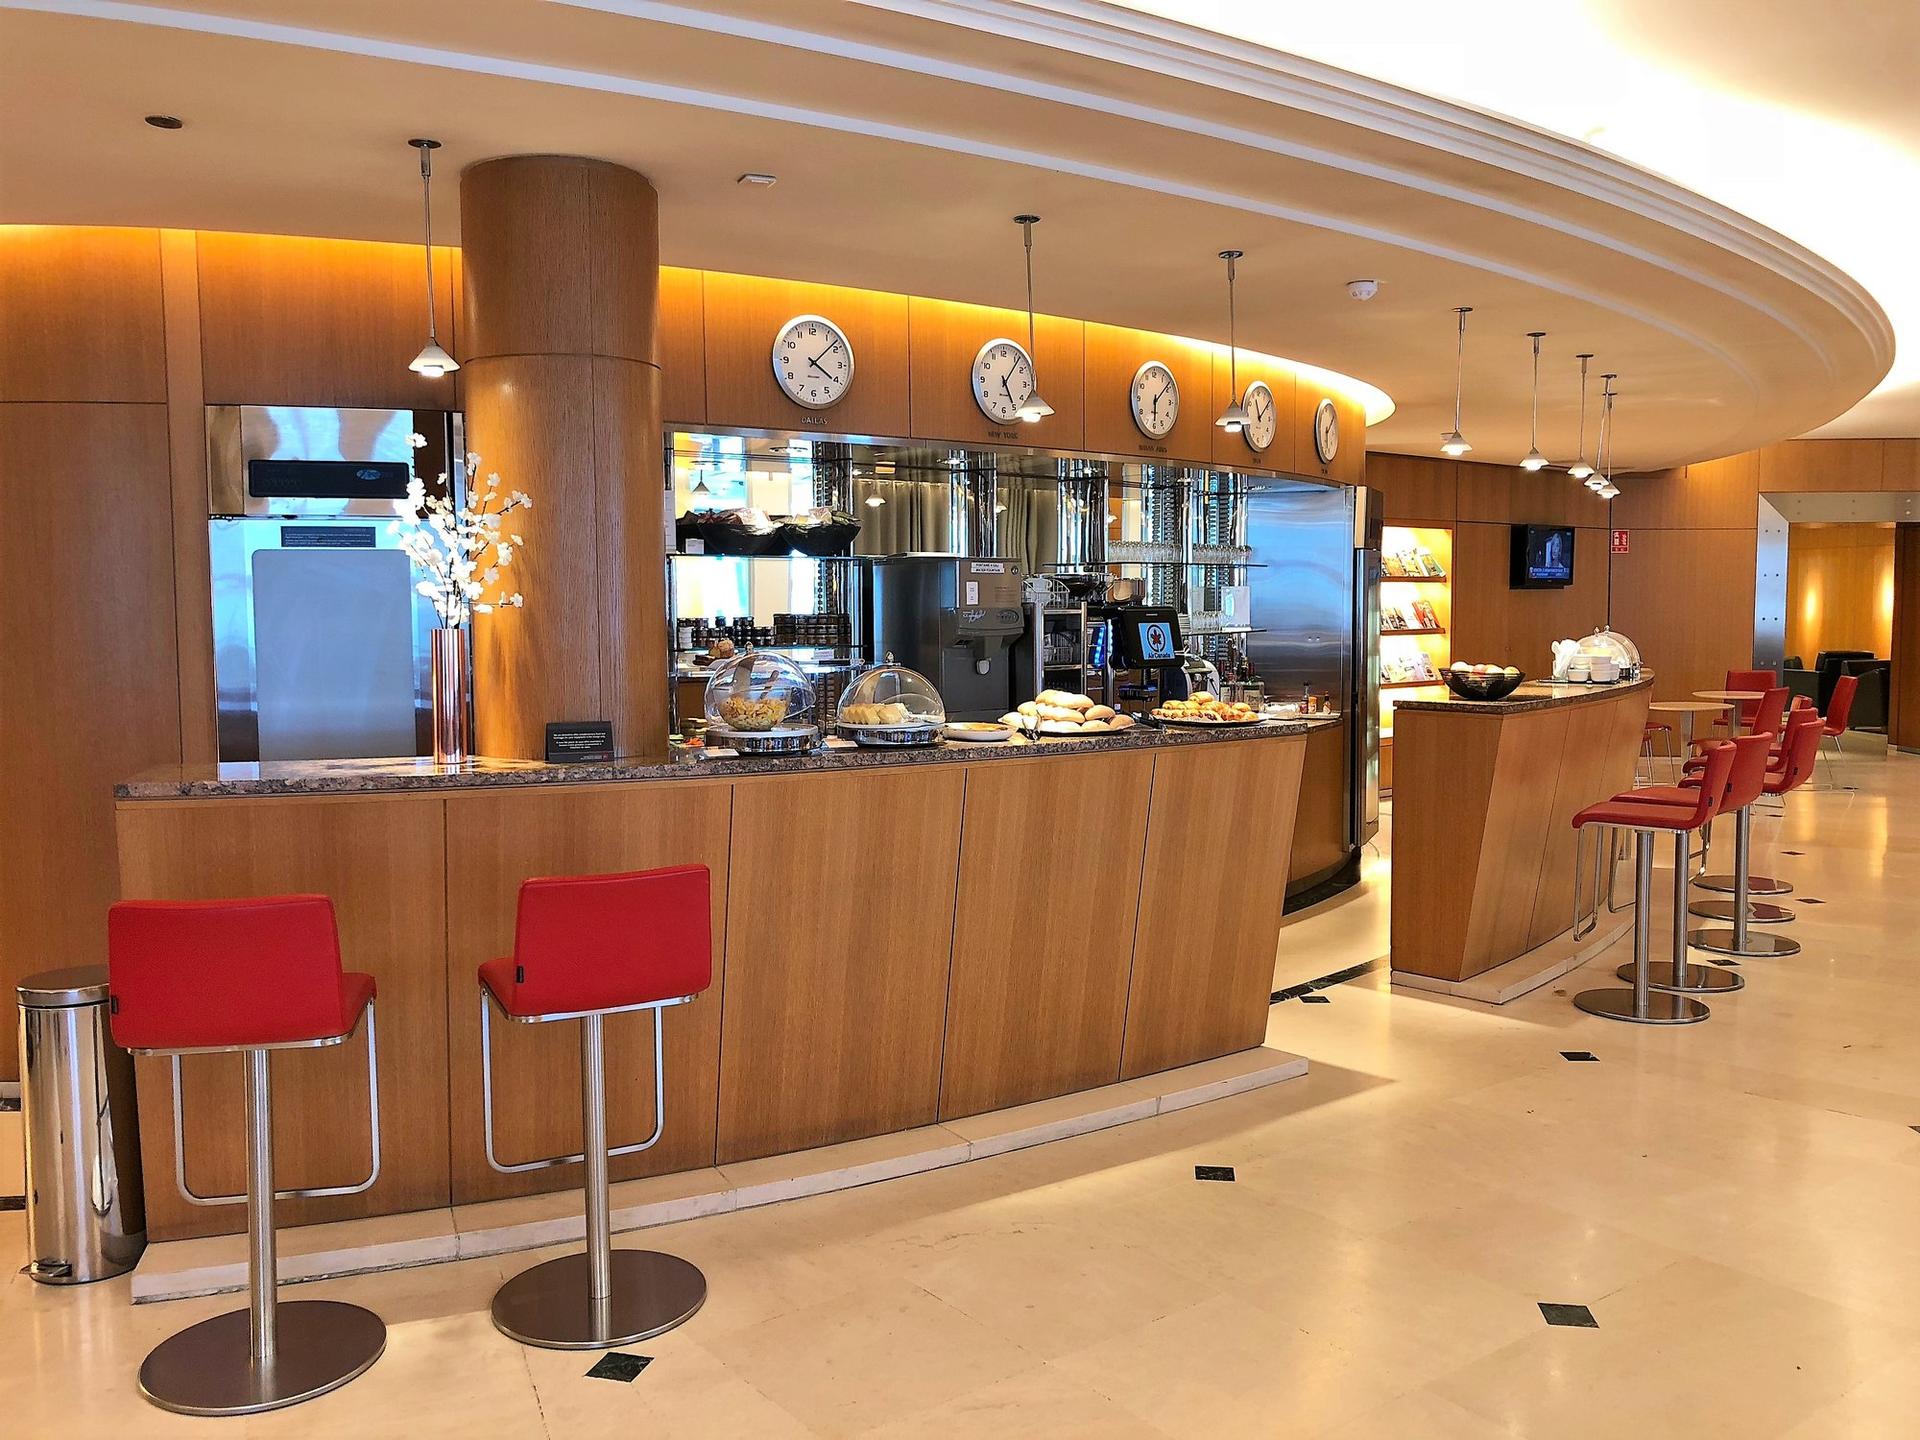 Air Canada Maple Leaf Lounge image 2 of 64